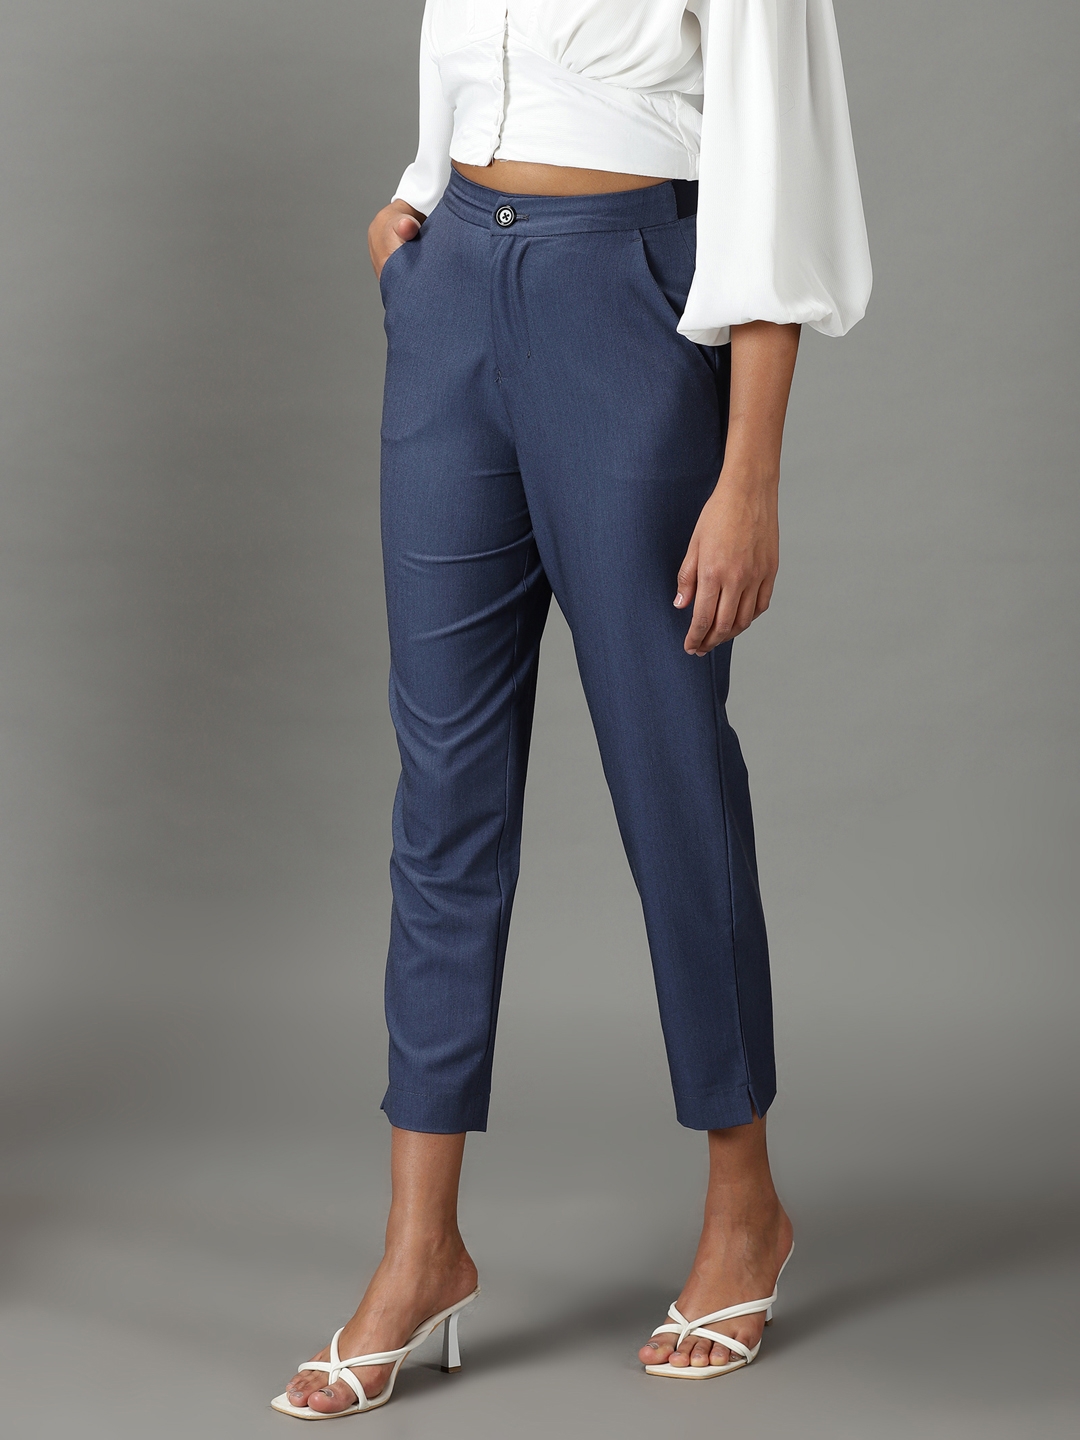 Formal Pants For Women Top Sellers  wwwillvacom 1692927750